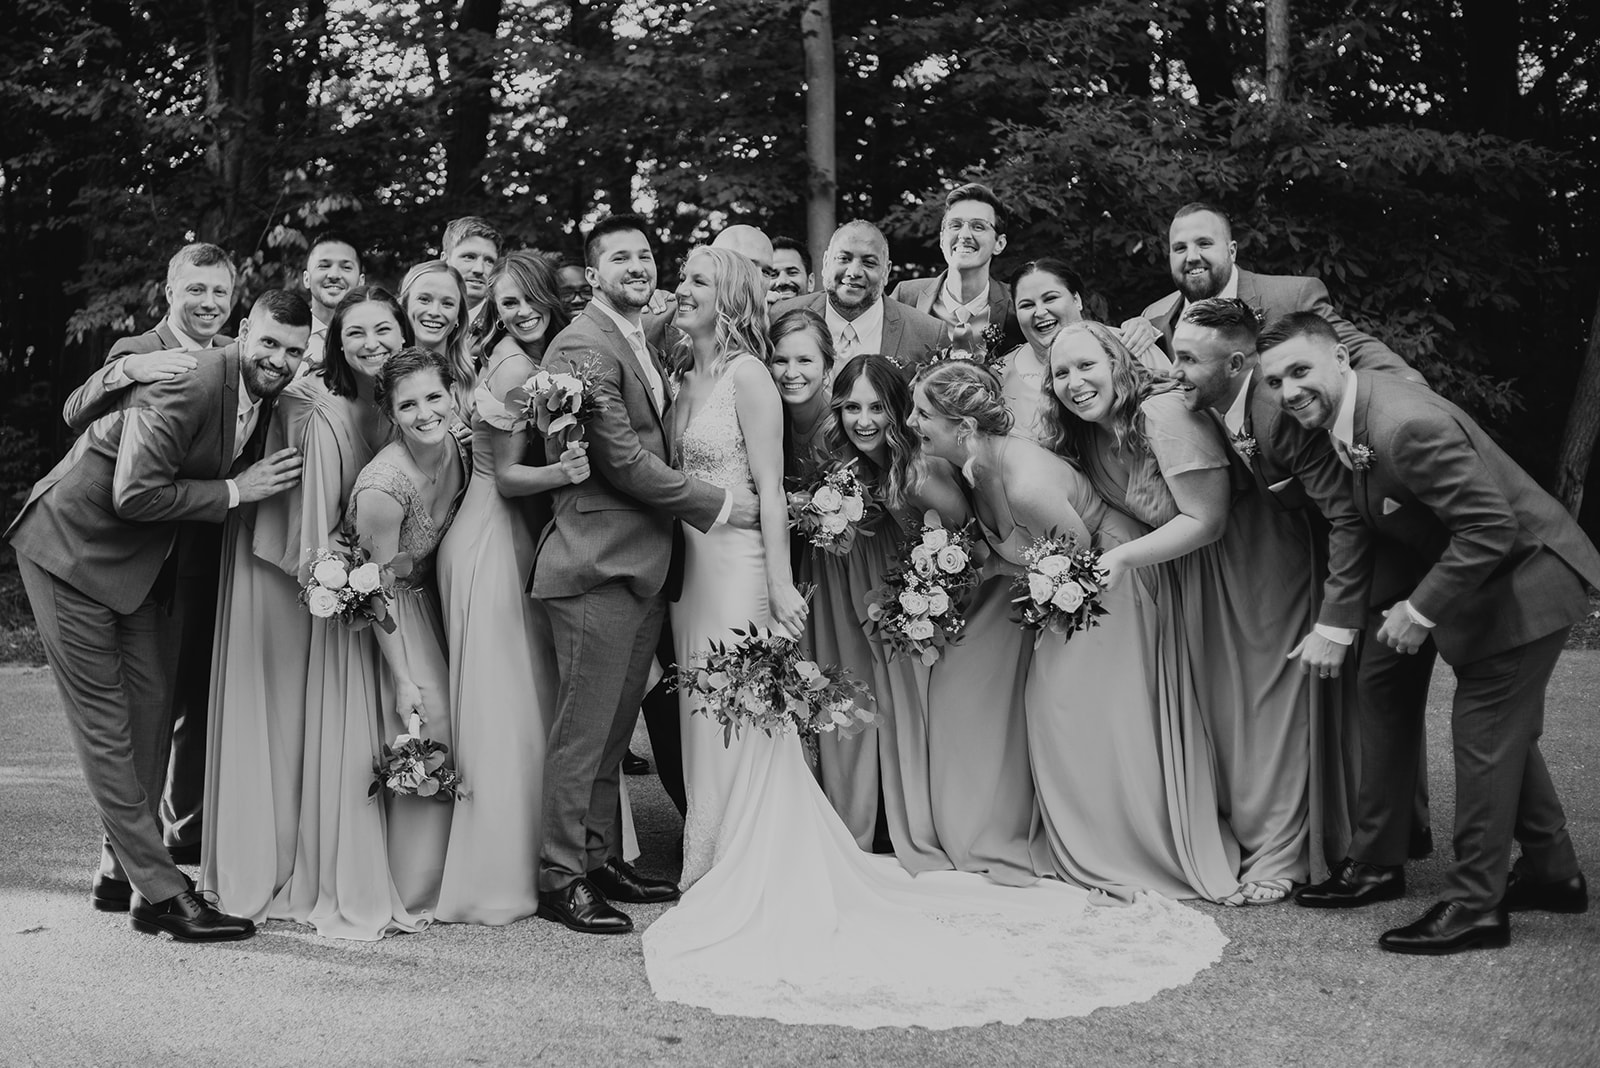 wedding party in grey and taupe wedding outfits at john ball zoo bissell treehouse photography by Liv Lyszyk